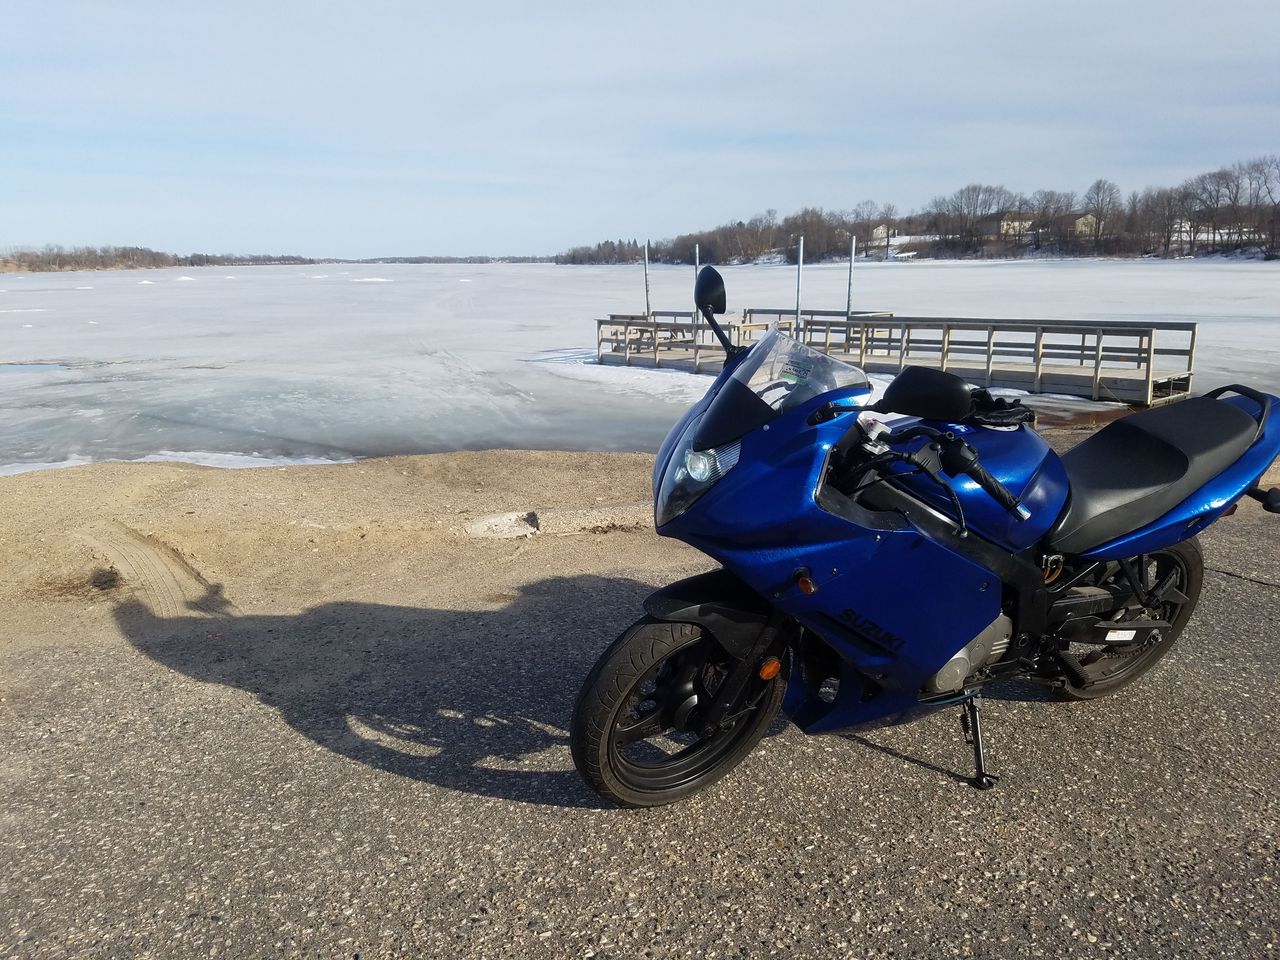 Only in Minnesota are the bikes out when the ice is still on the lake